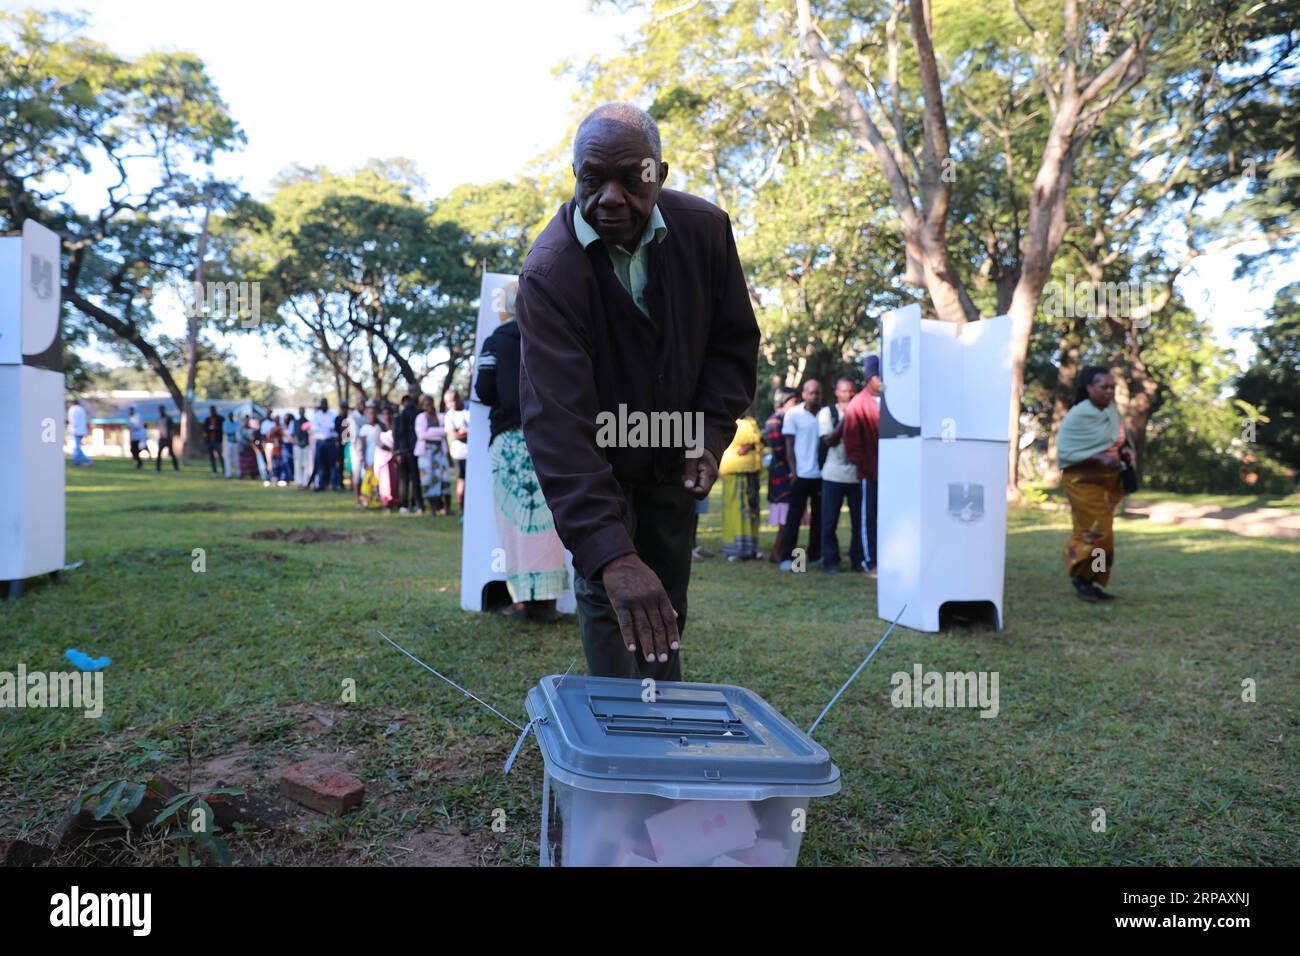 190521 -- BLANTYRE, May 21, 2019 Xinhua -- A voter casts his ballot at Blantyre Secondary School Polling Station in Blantyre, Malawi, May 21, 2019. Malawians across the country on Tuesday queued up to cast ballots that will determine which party is to rule the country in the next five years. Xinhua/Peng Lijun MALAWI-BLANTYRE-ELECTION-VOTE PUBLICATIONxNOTxINxCHN Stock Photo